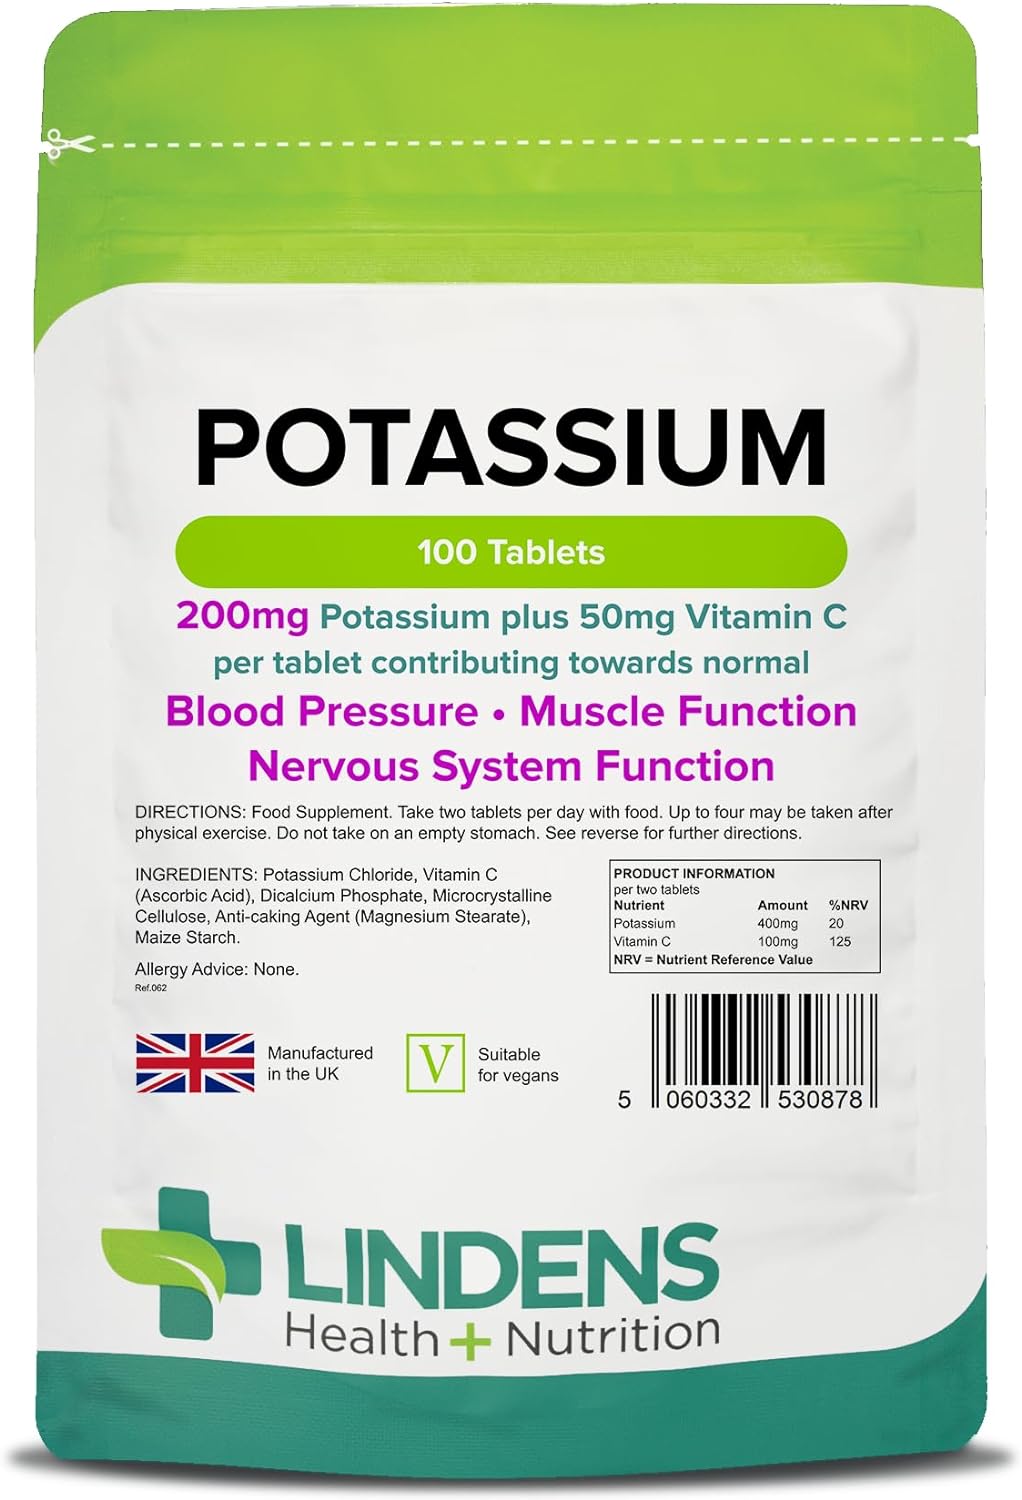 Lindens Potassium 200mg Tablets with 50mg Vitamin C - 100 Tablets - Contributes to Normal Blood Pressure, Muscle Function and Nervous System Function - UK Manufacturer, Letterbox Friendly